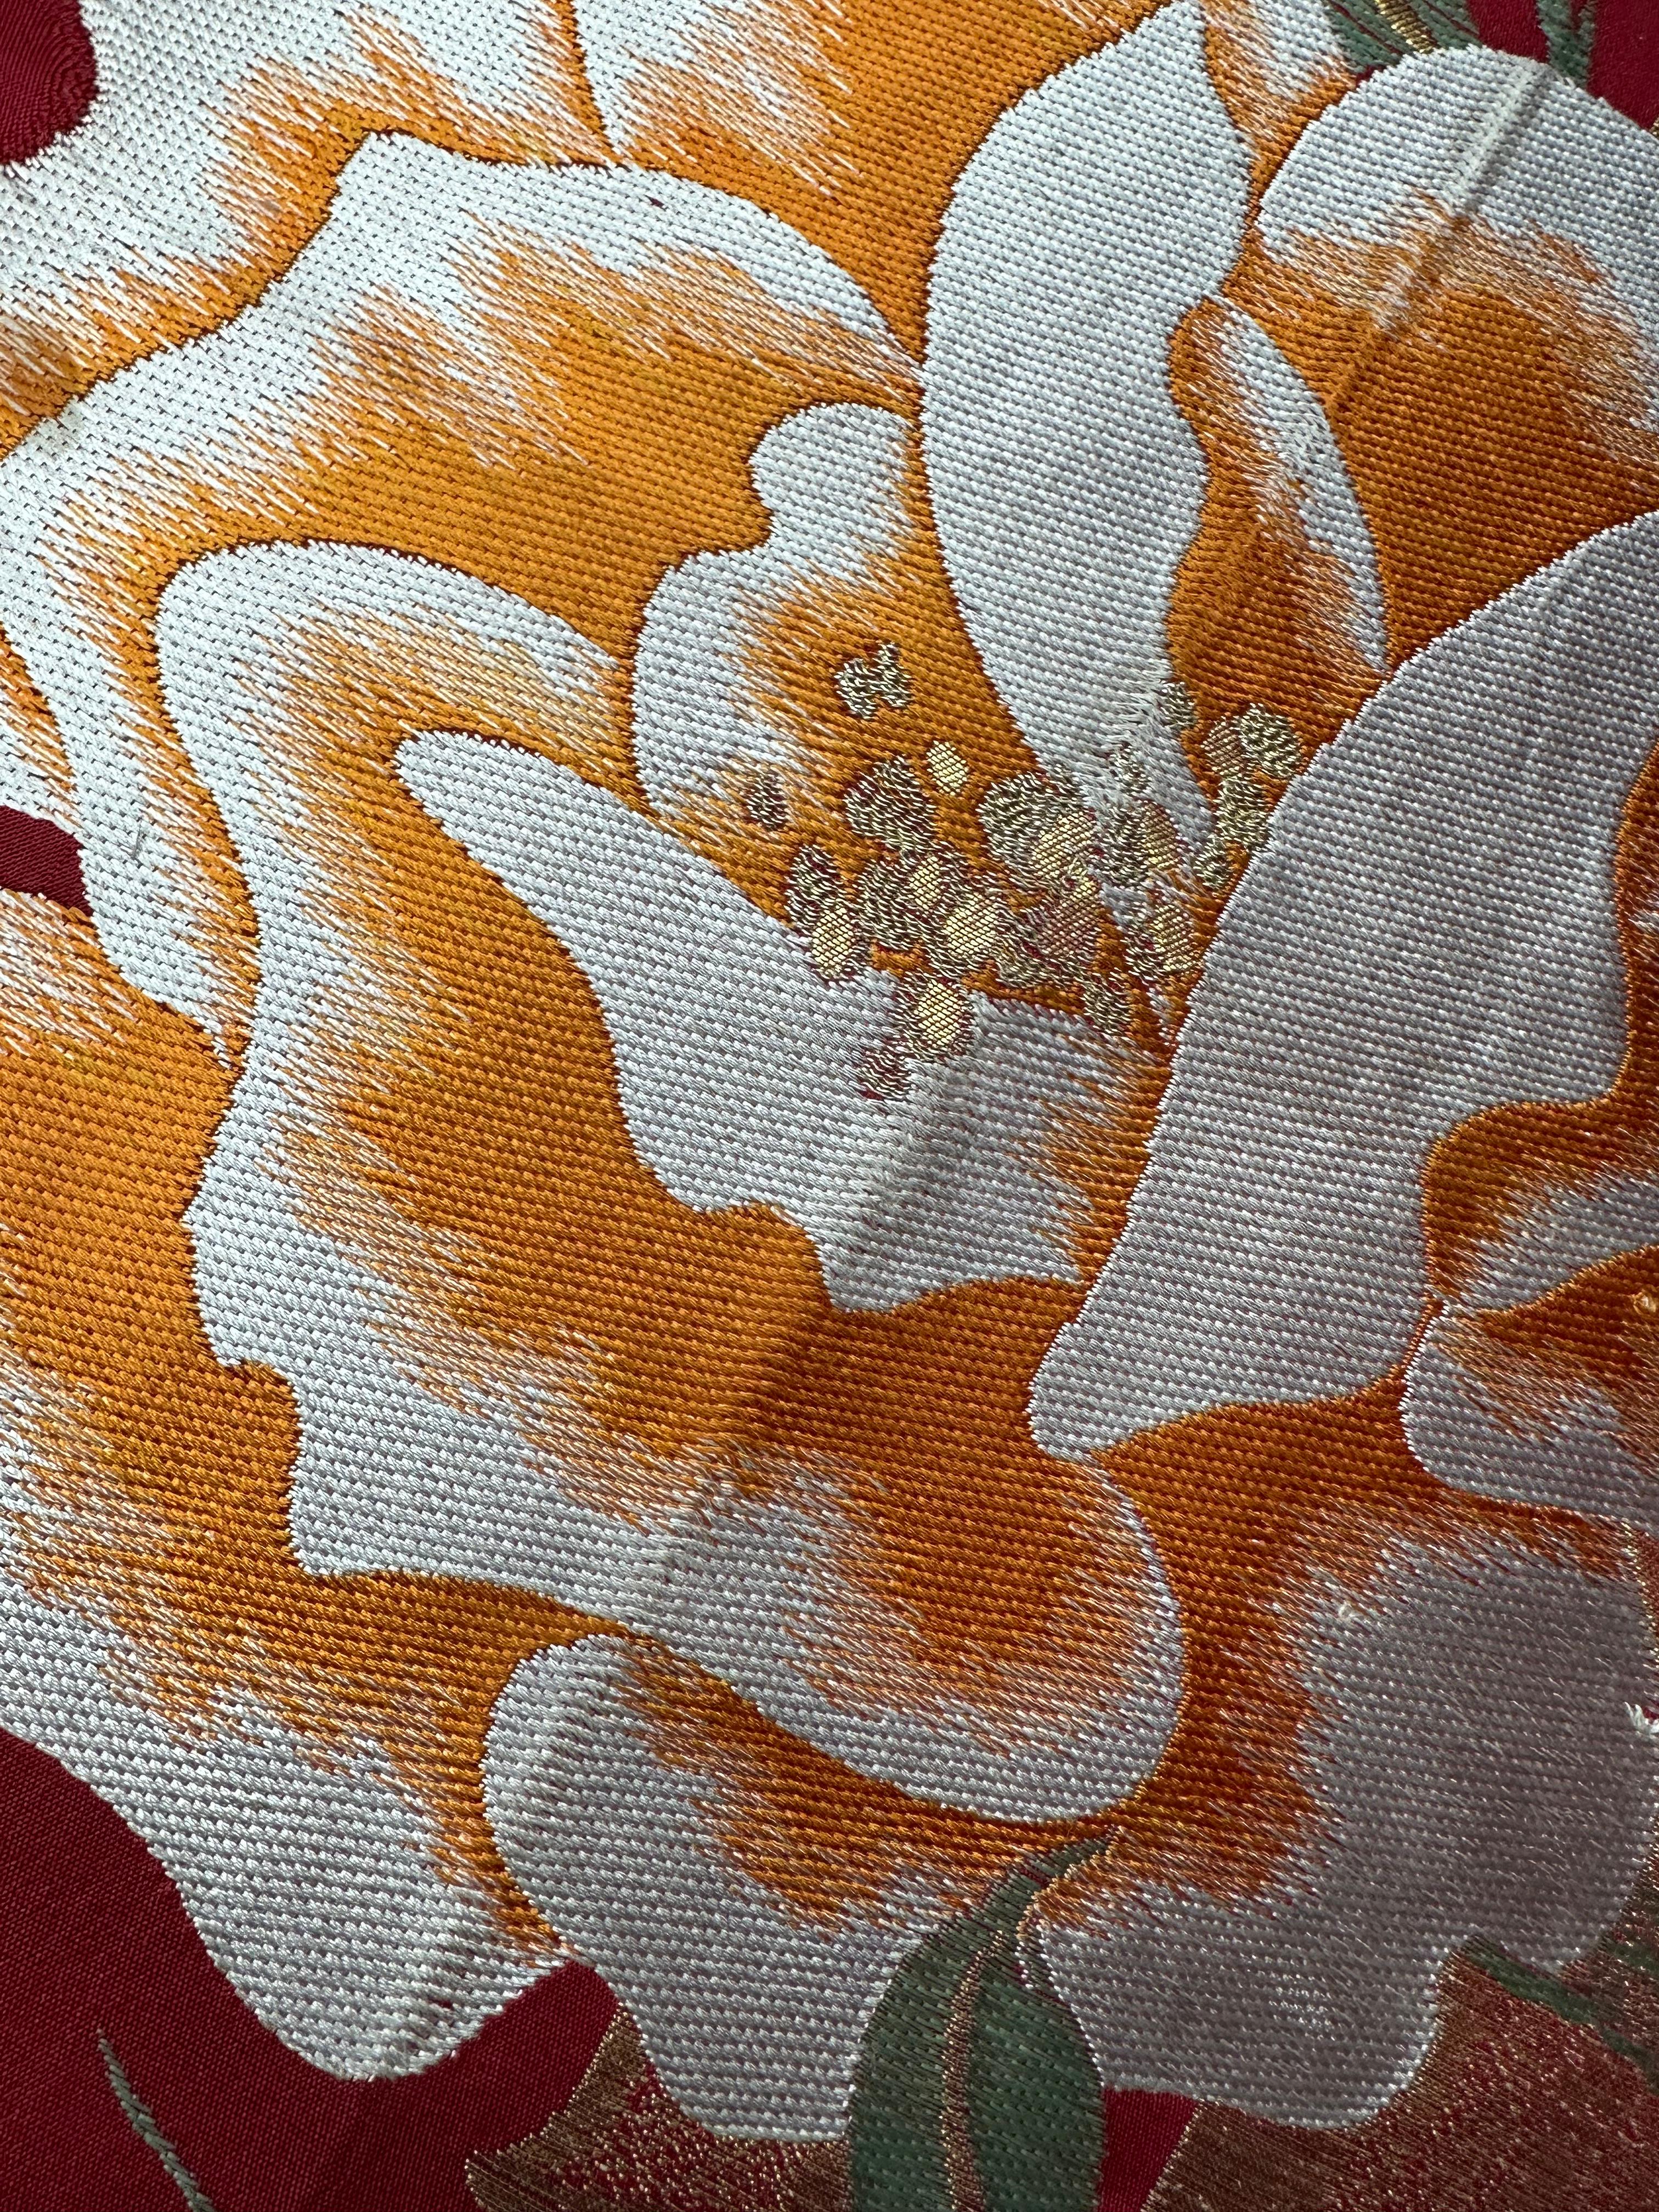 Hand-Crafted Japanese Kimono Art / Embroidered Wall Art, Mother's Rose For Sale